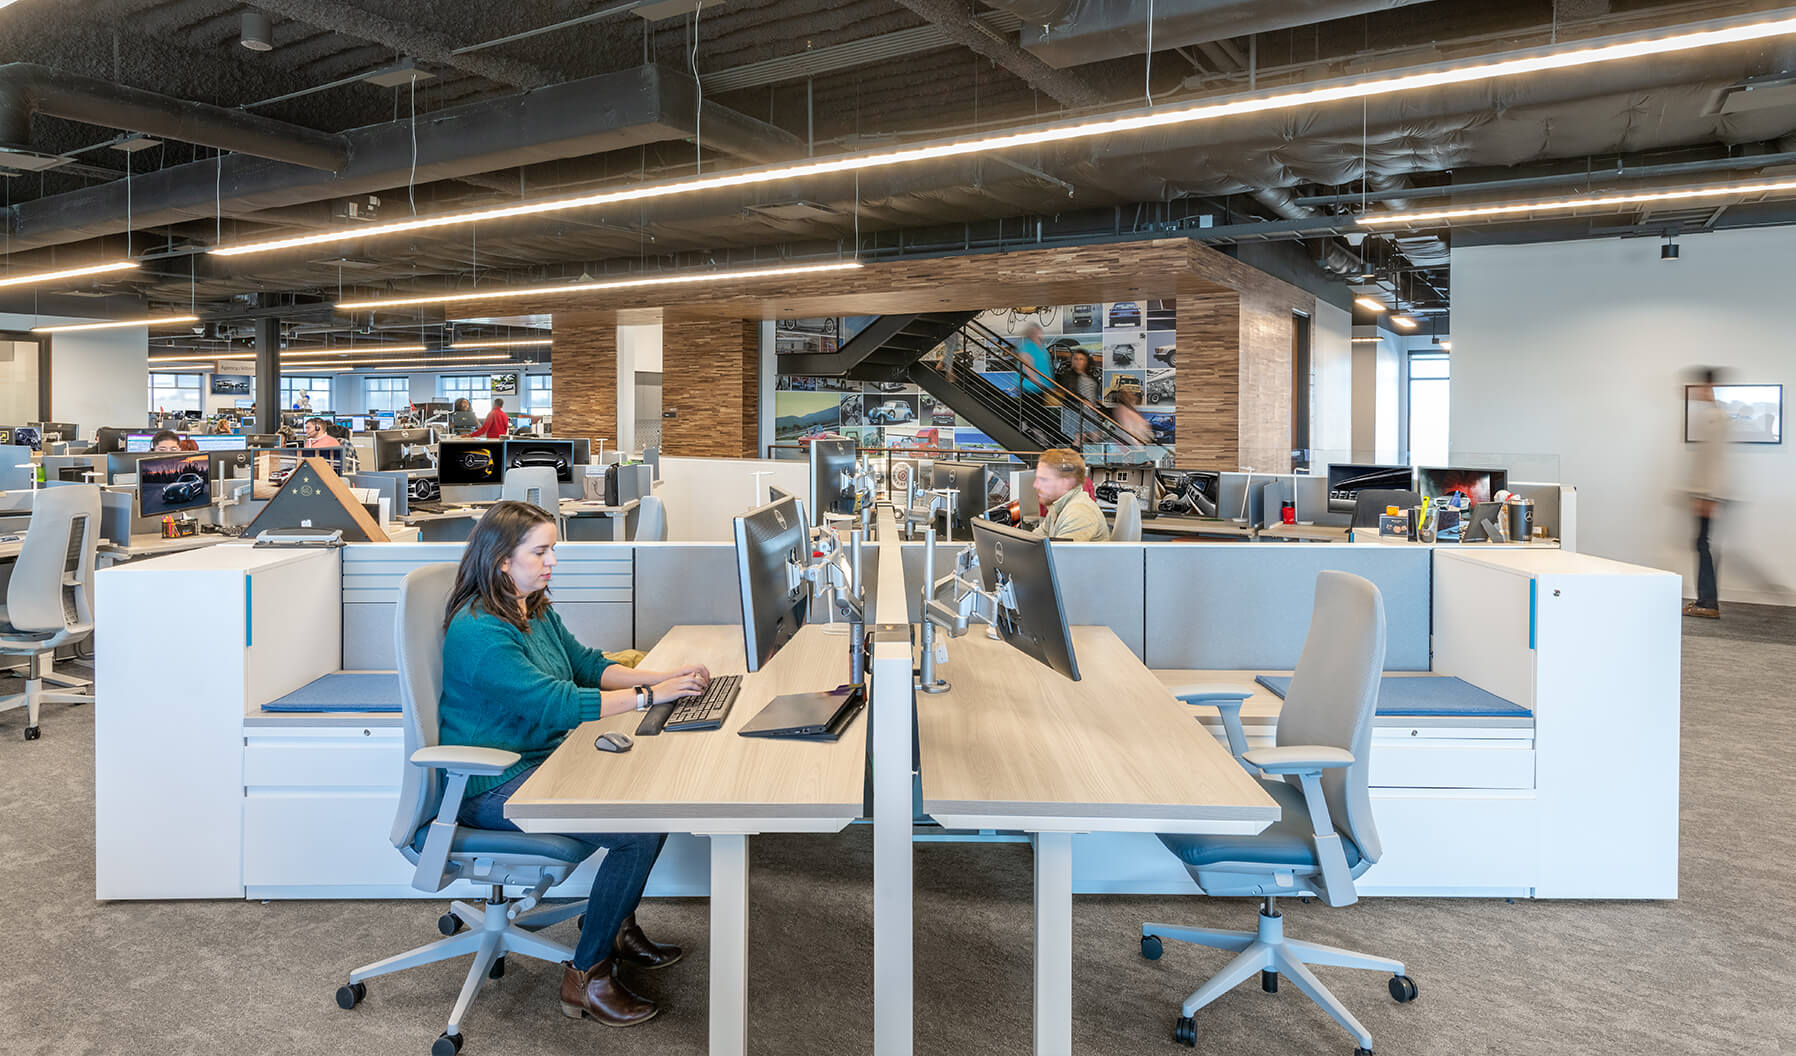 Individual workstations at Mercedes-Benz Financial Services were designed for maximum comfort and efficiency. Each station boasts a height-adjustable table, a Fern task chair for good ergonomics, and dual monitors. 